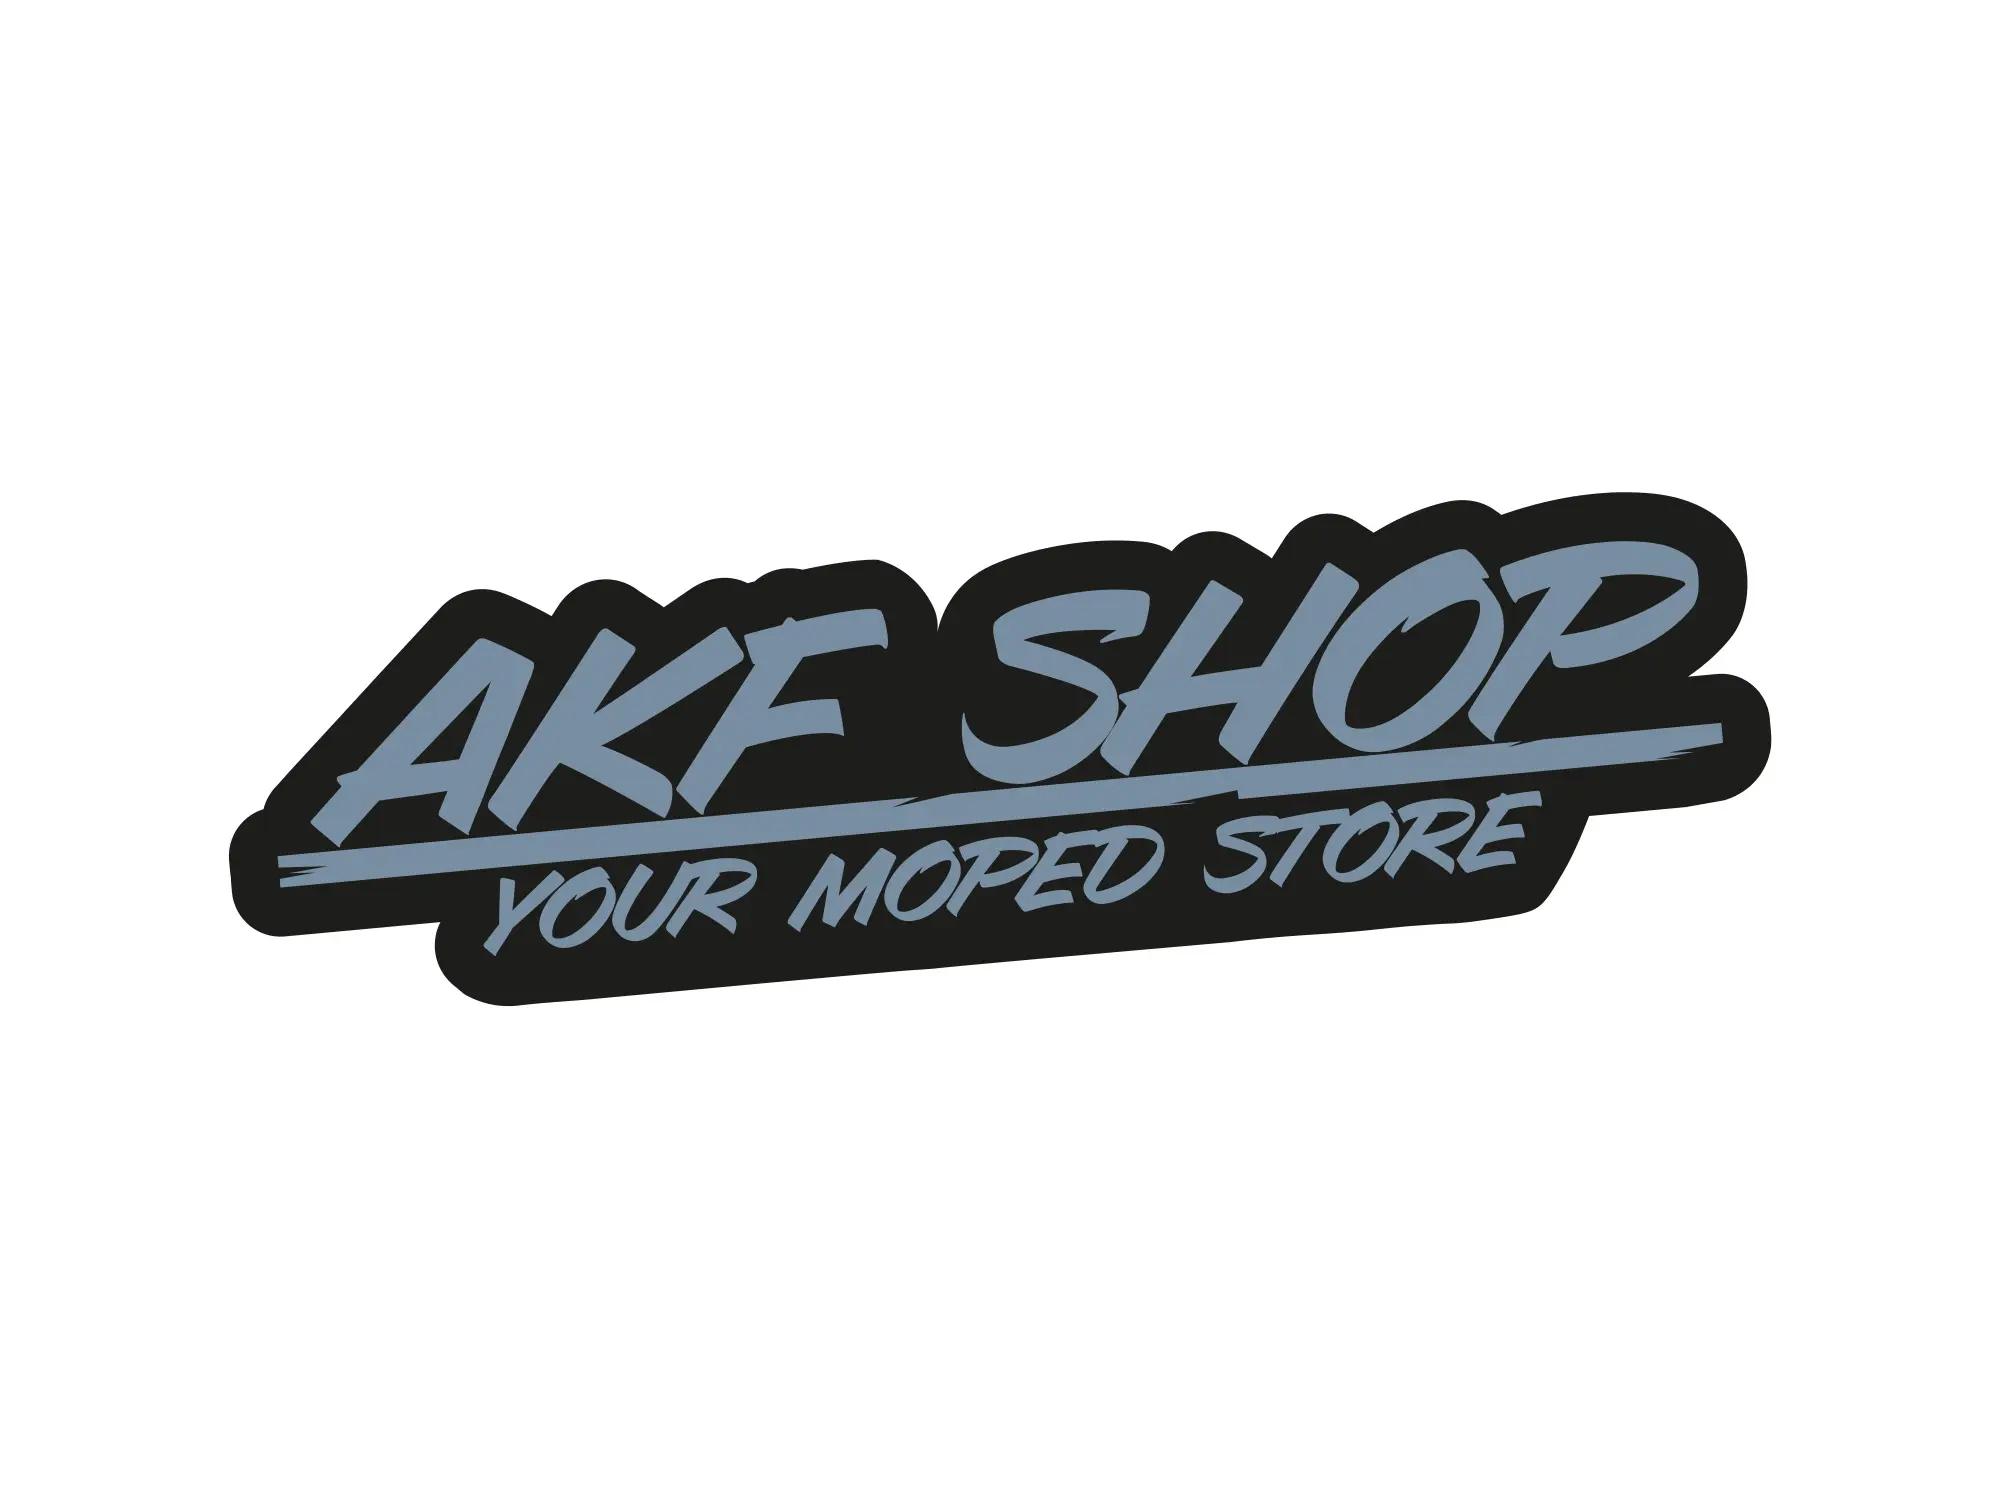 Sticker - AKF Shop - your moped store Black/Gray, contour cut